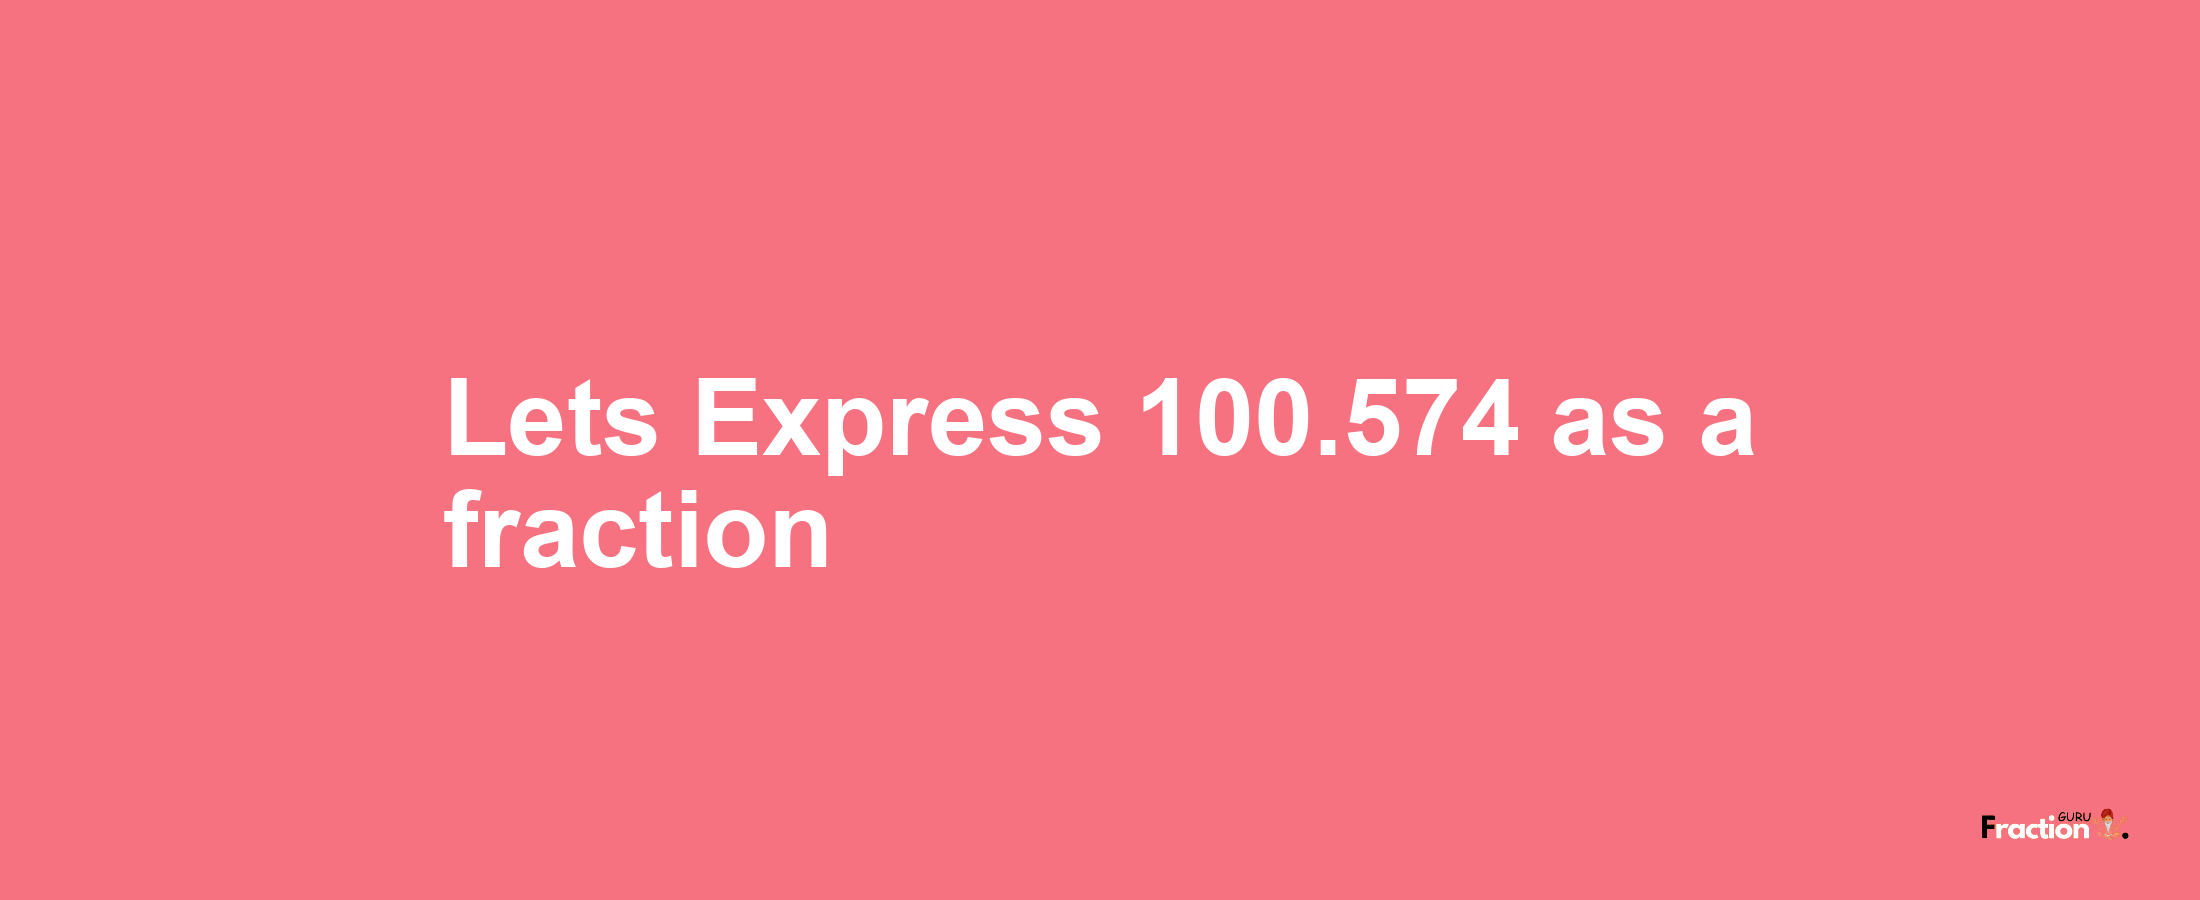 Lets Express 100.574 as afraction